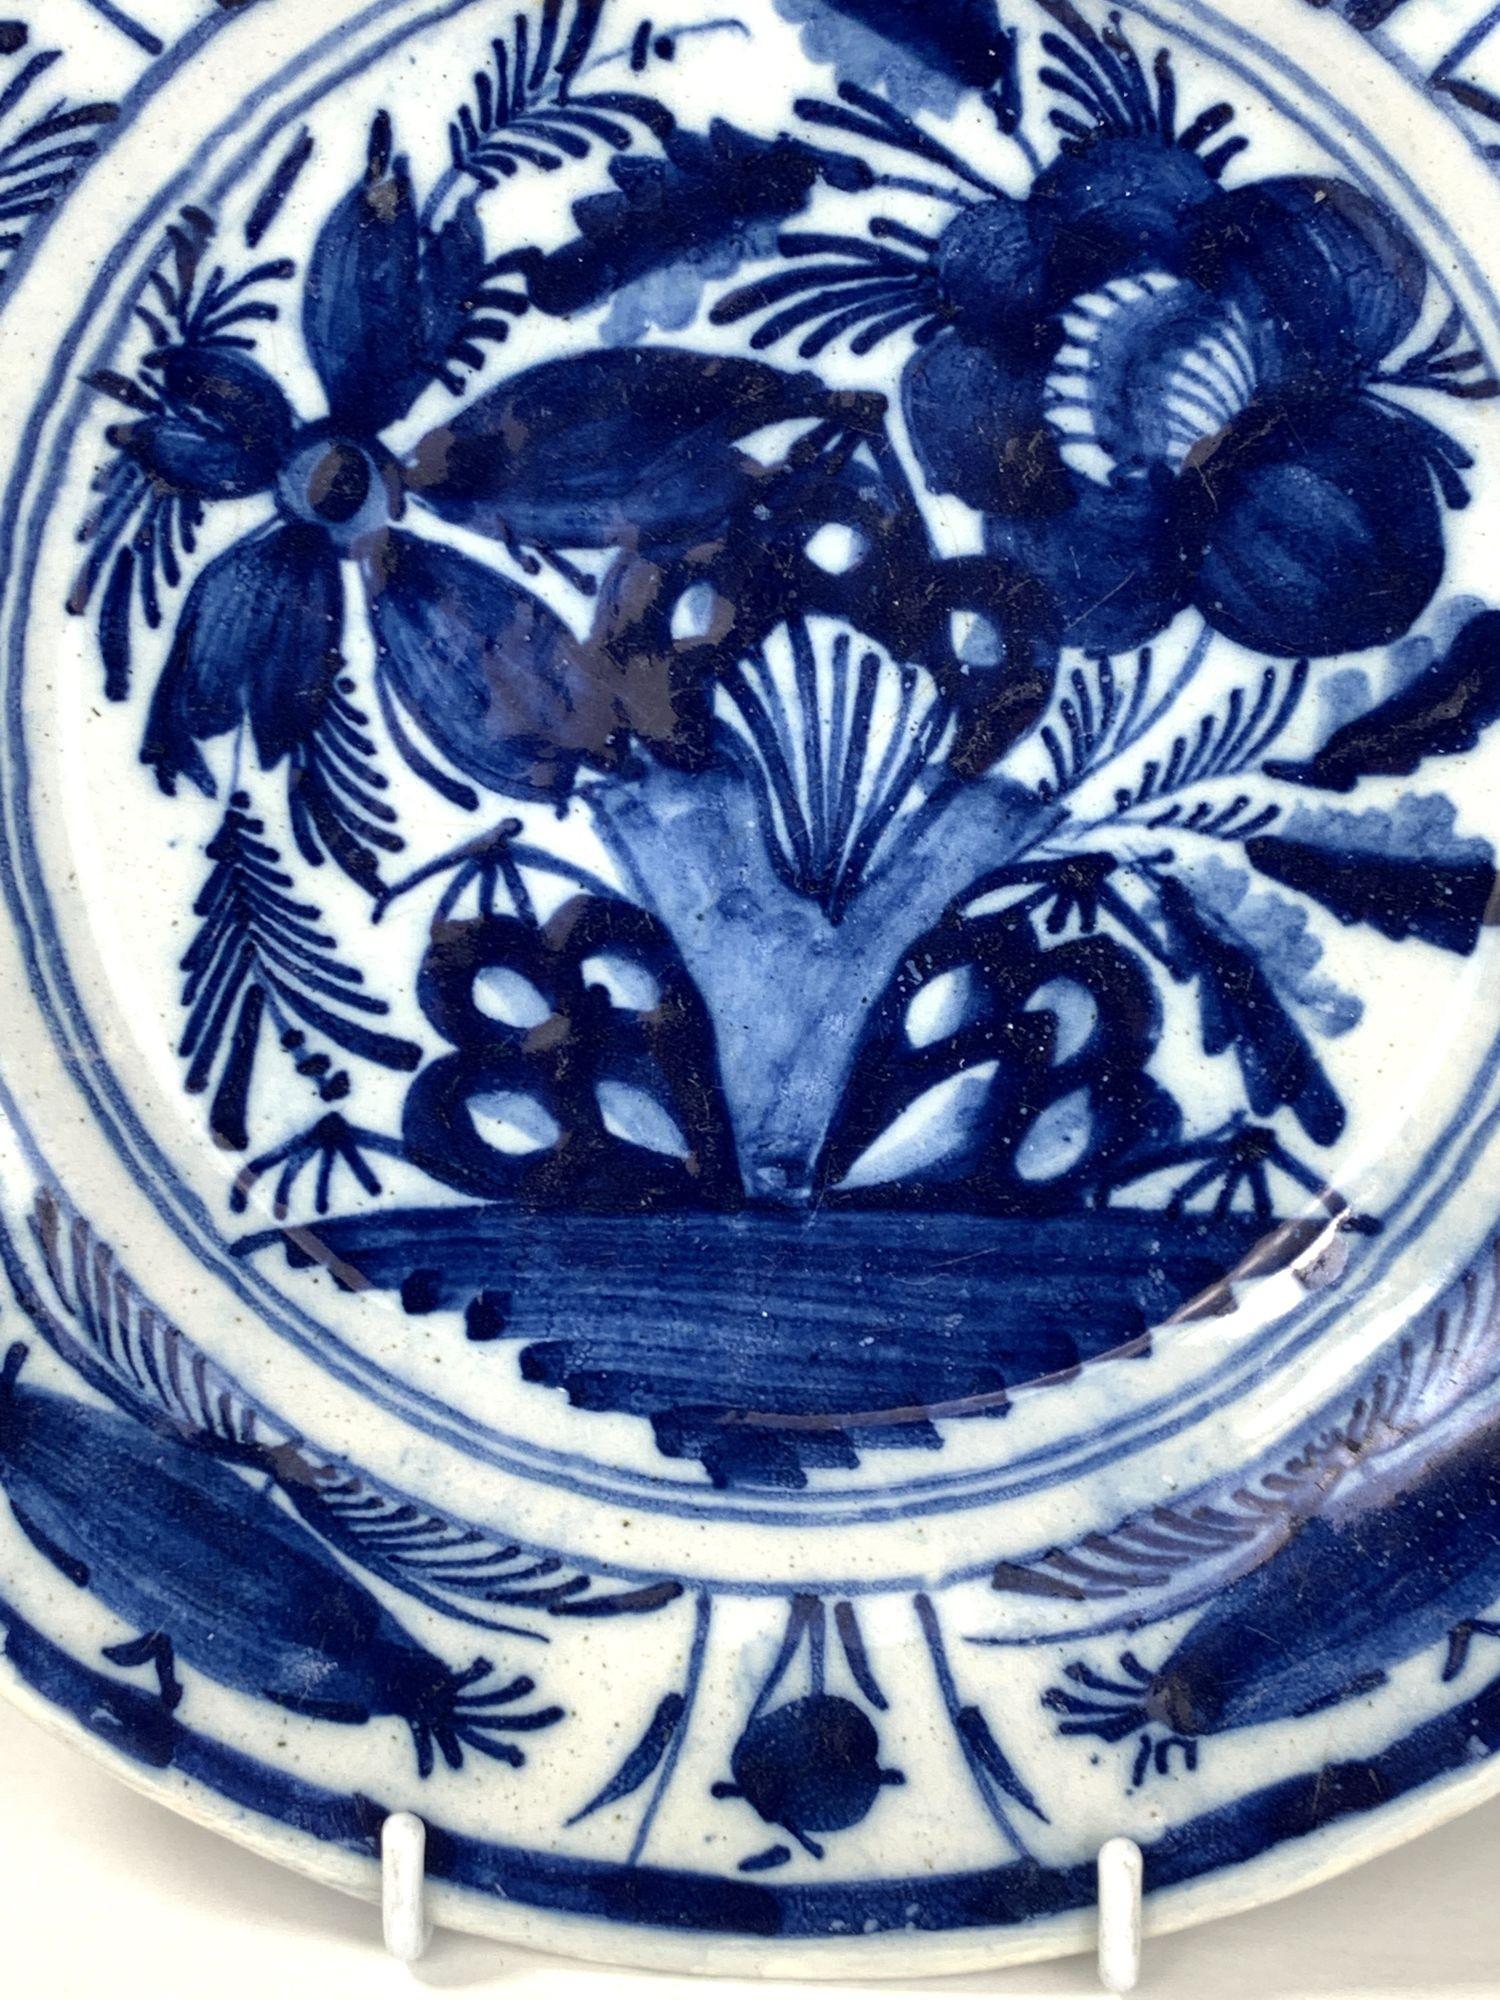 19th Century Blue and White Delft Plate or Dish Hand Painted Circa 1800 For Sale